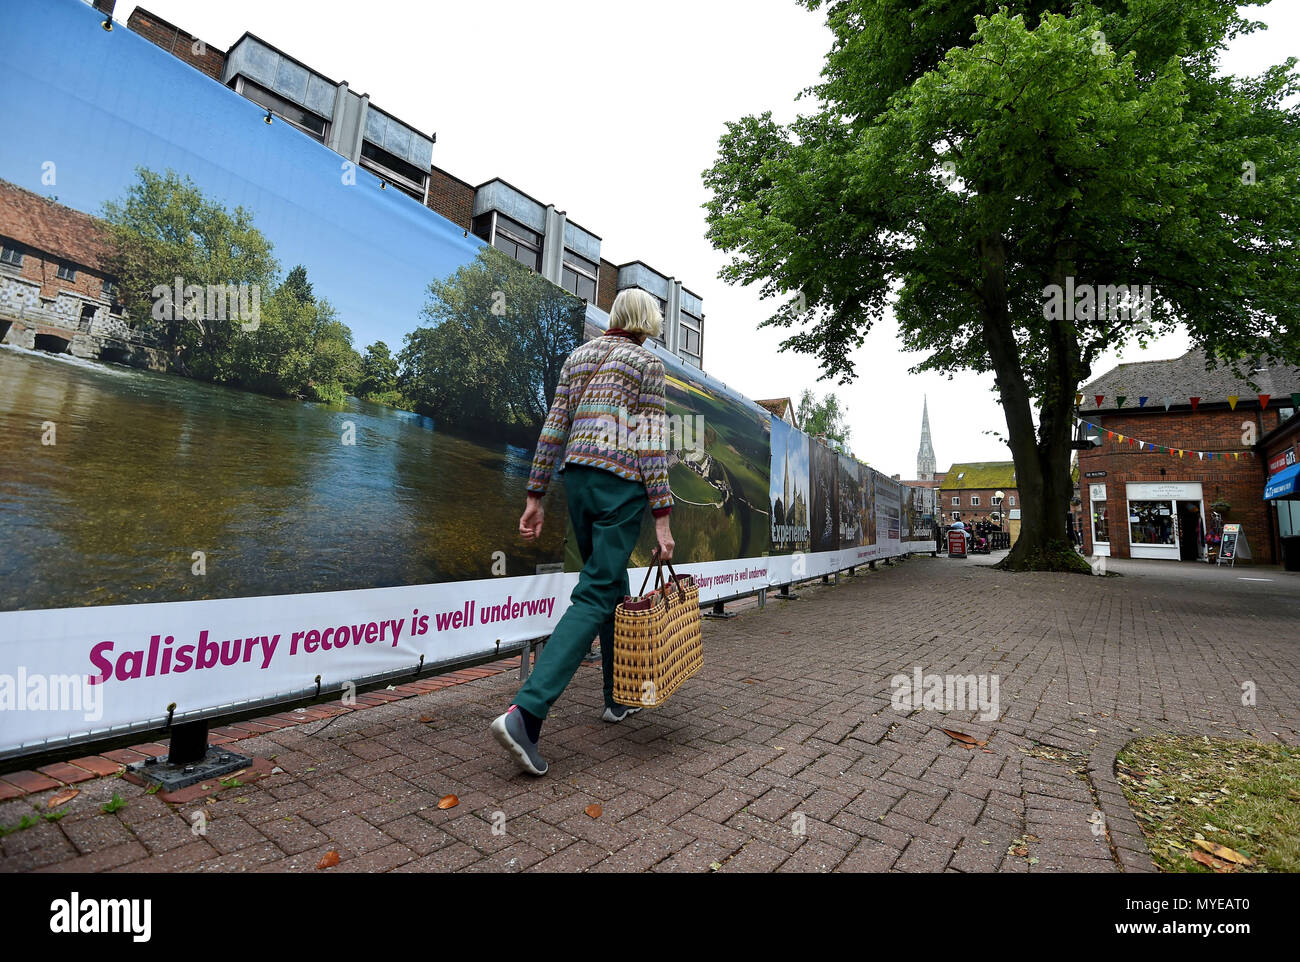 Salisbury, Wiltshire, UK. 7th June, 2018. General views of The Maltings shopping area, 2 weeks after reopening to the public after the poisoning of the poisoning of Sergei and Yulia Skripal, Salisbury, Wiltshire Credit: Finnbarr Webster/Alamy Live News Stock Photo